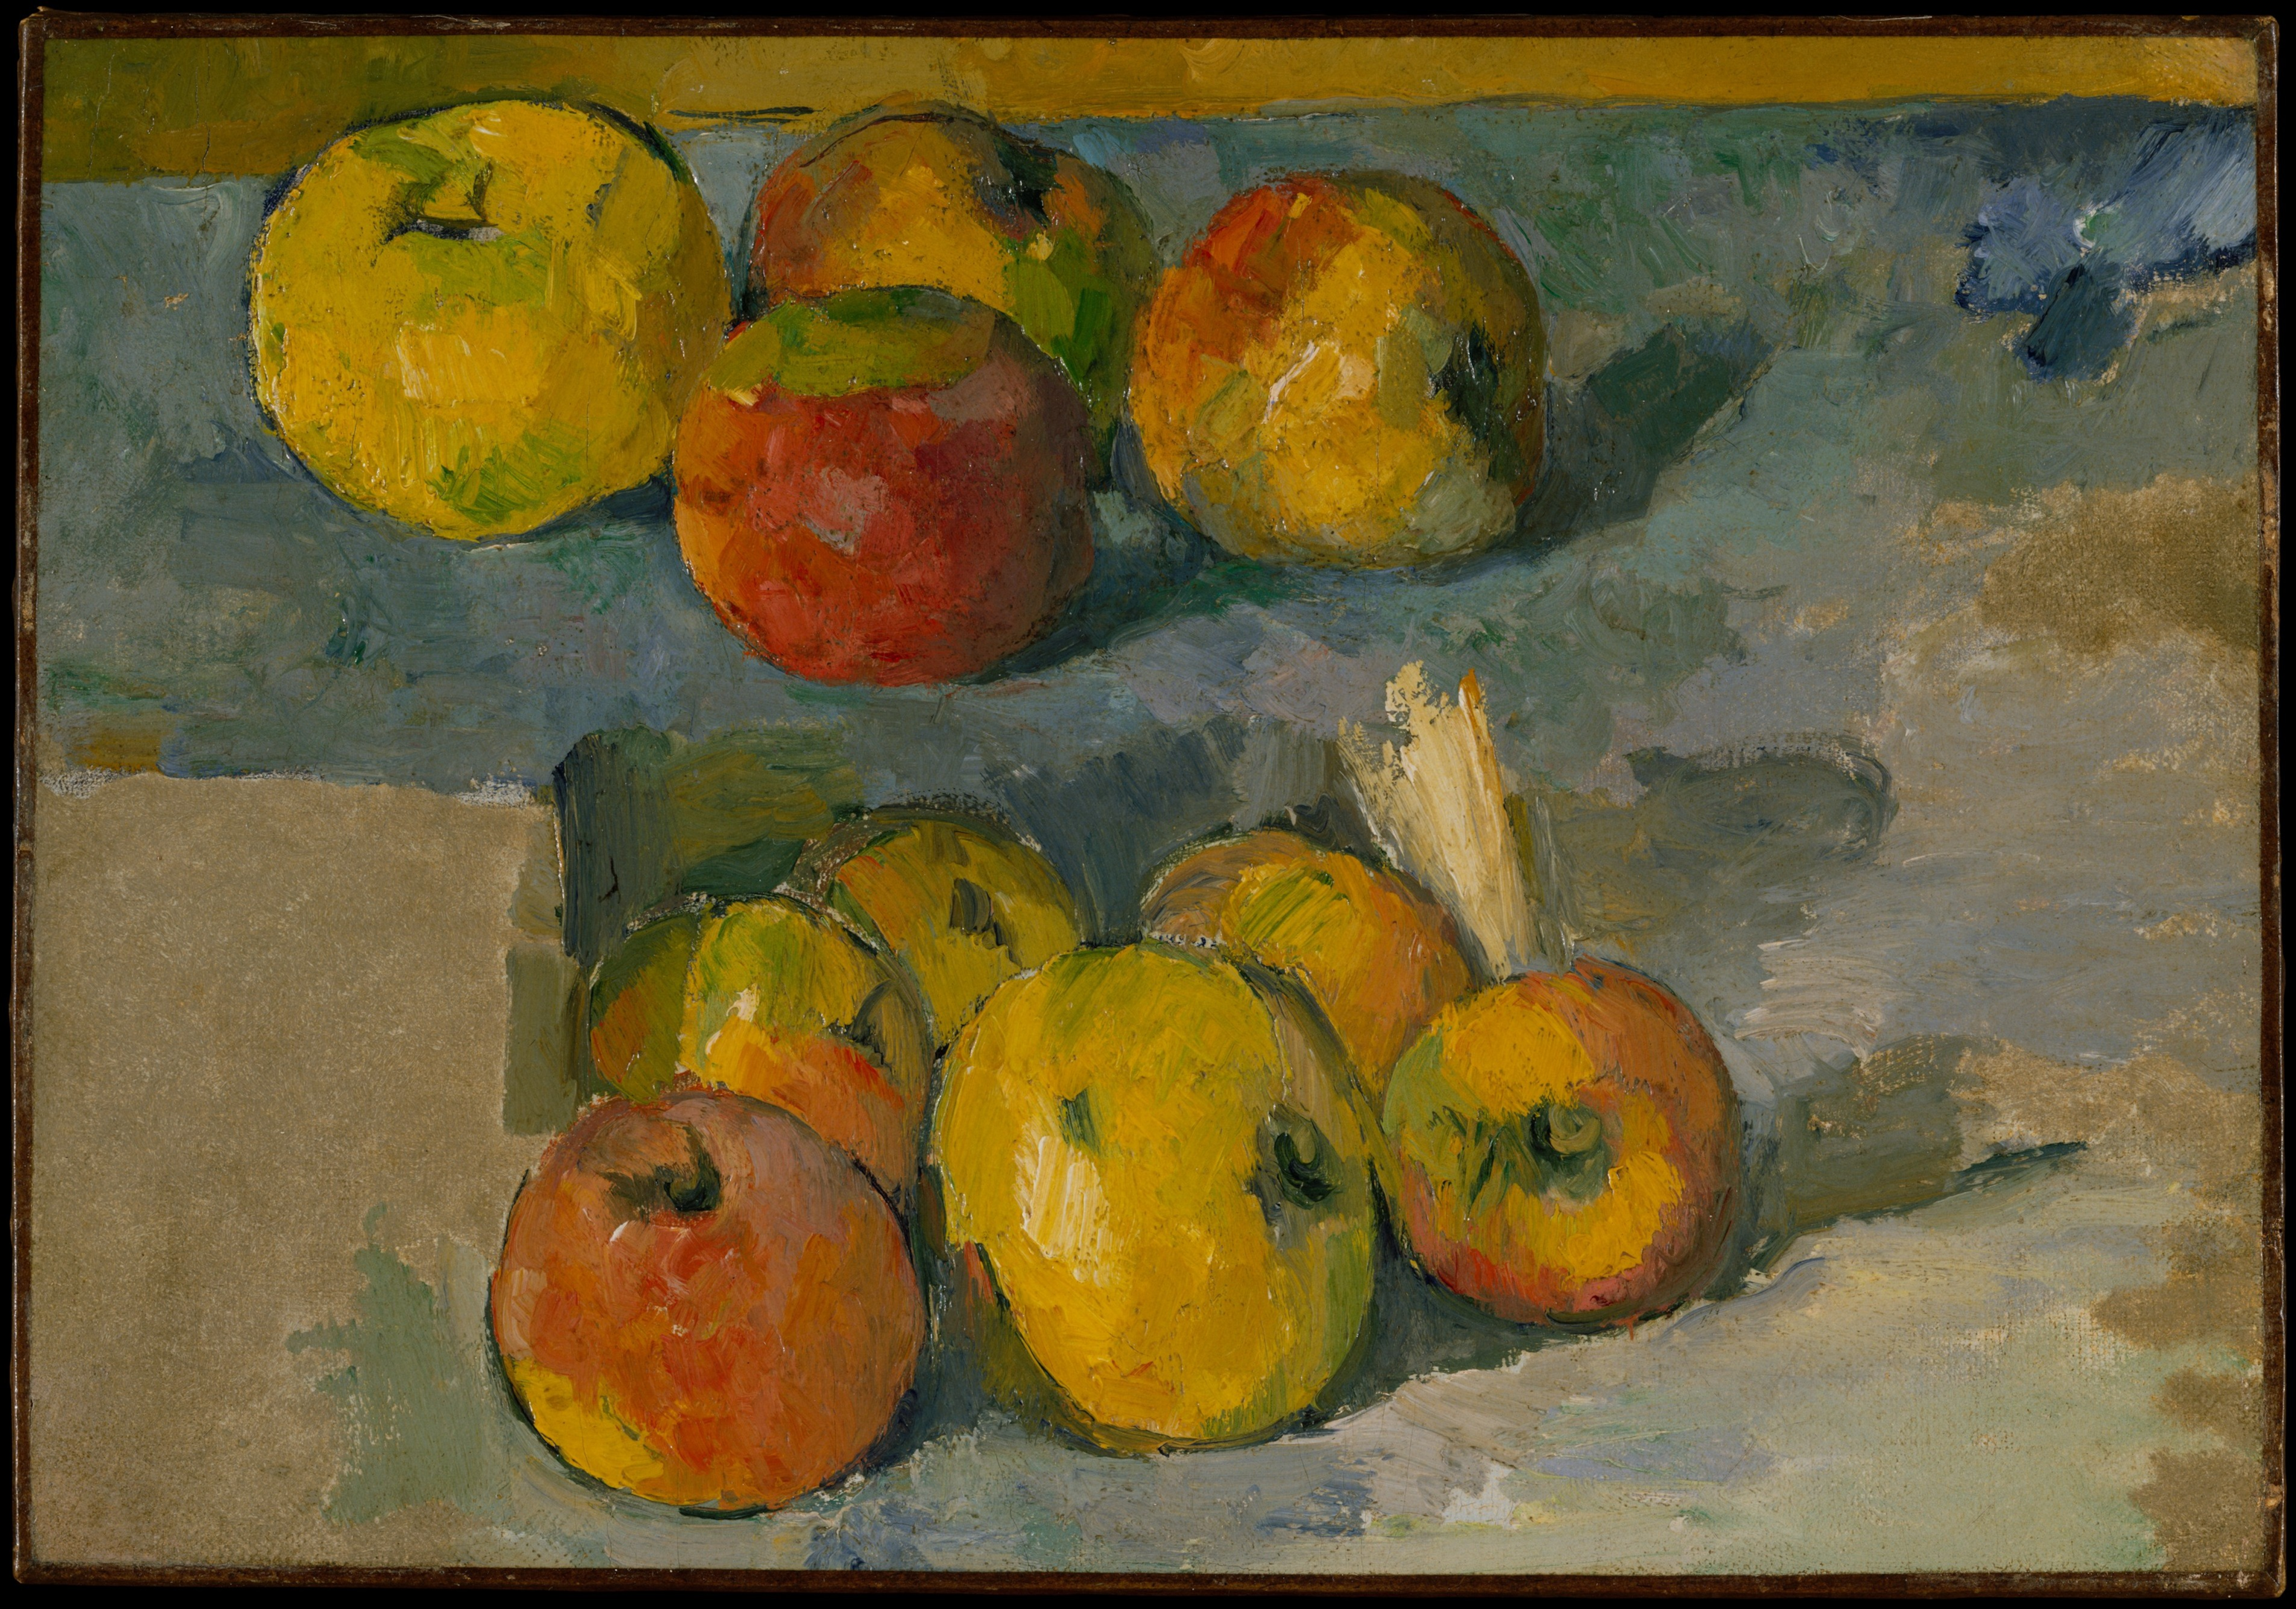 Apples photo link : https://www.metmuseum.org/art/collection/search/435866 